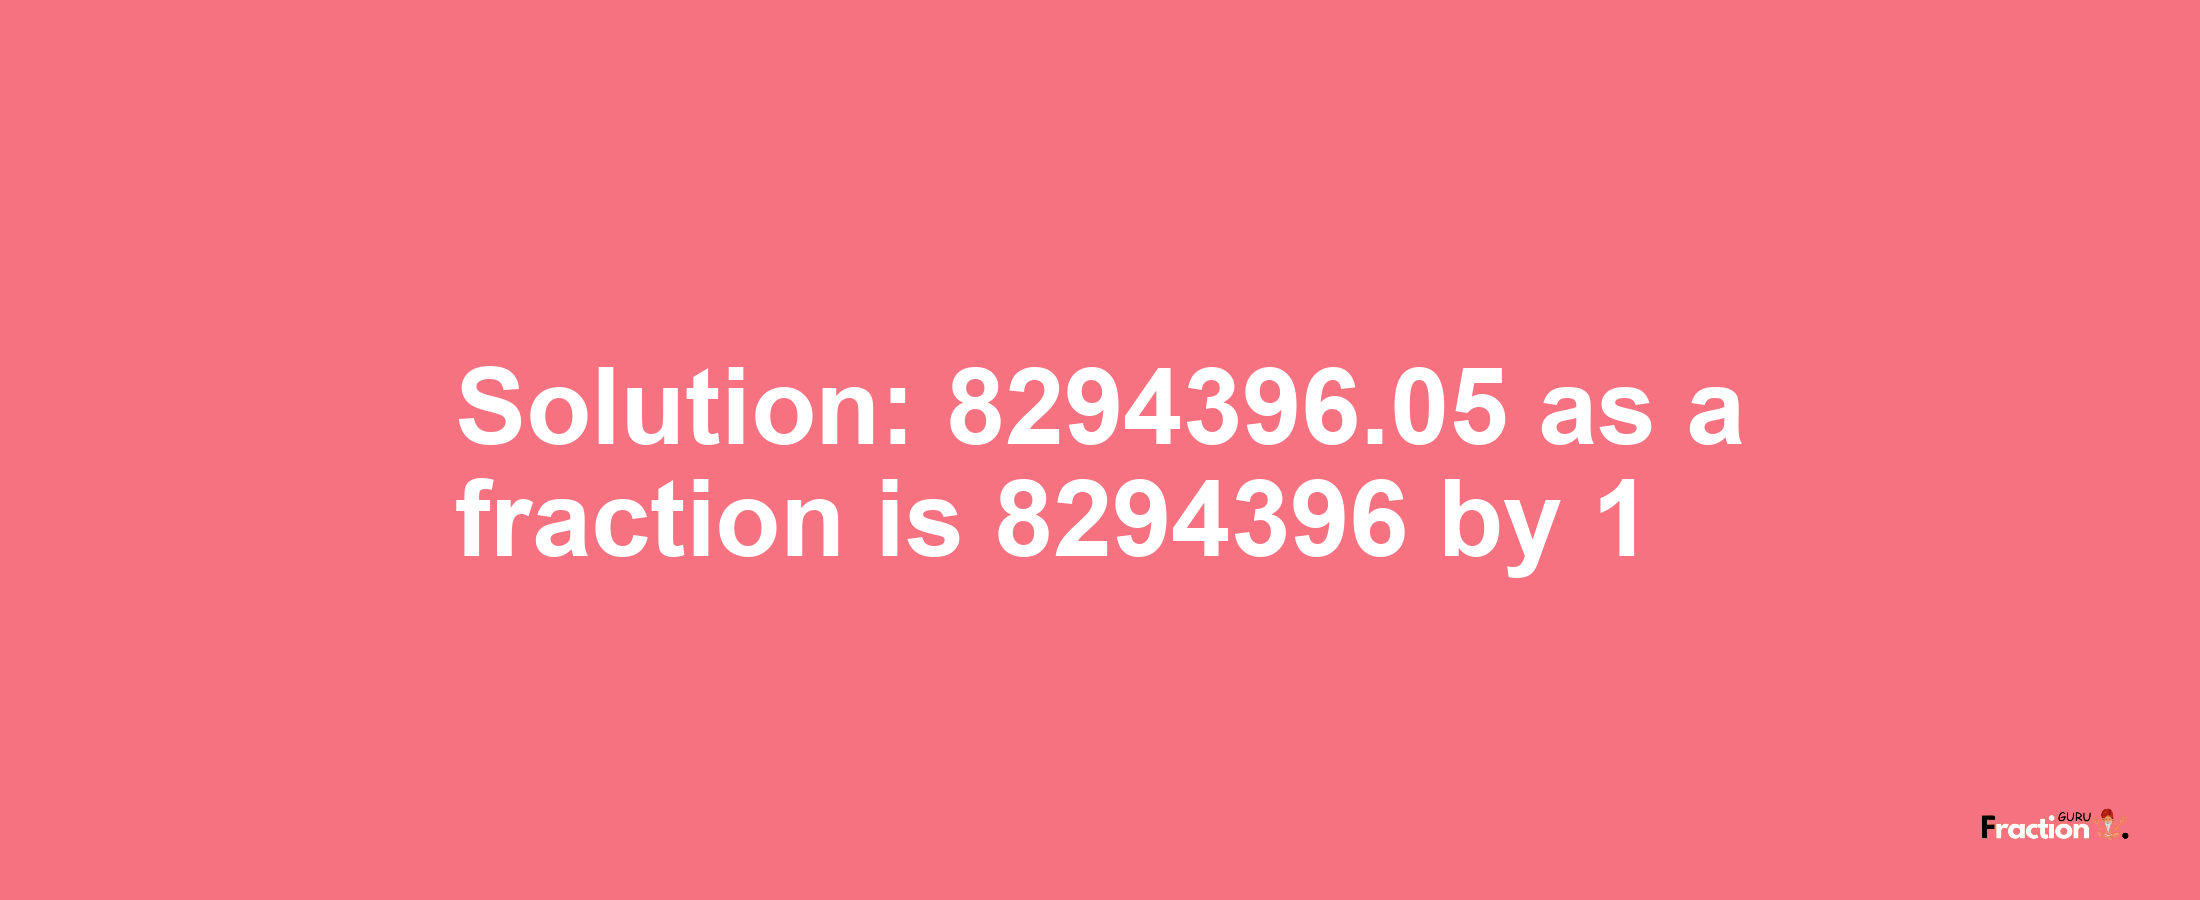 Solution:8294396.05 as a fraction is 8294396/1